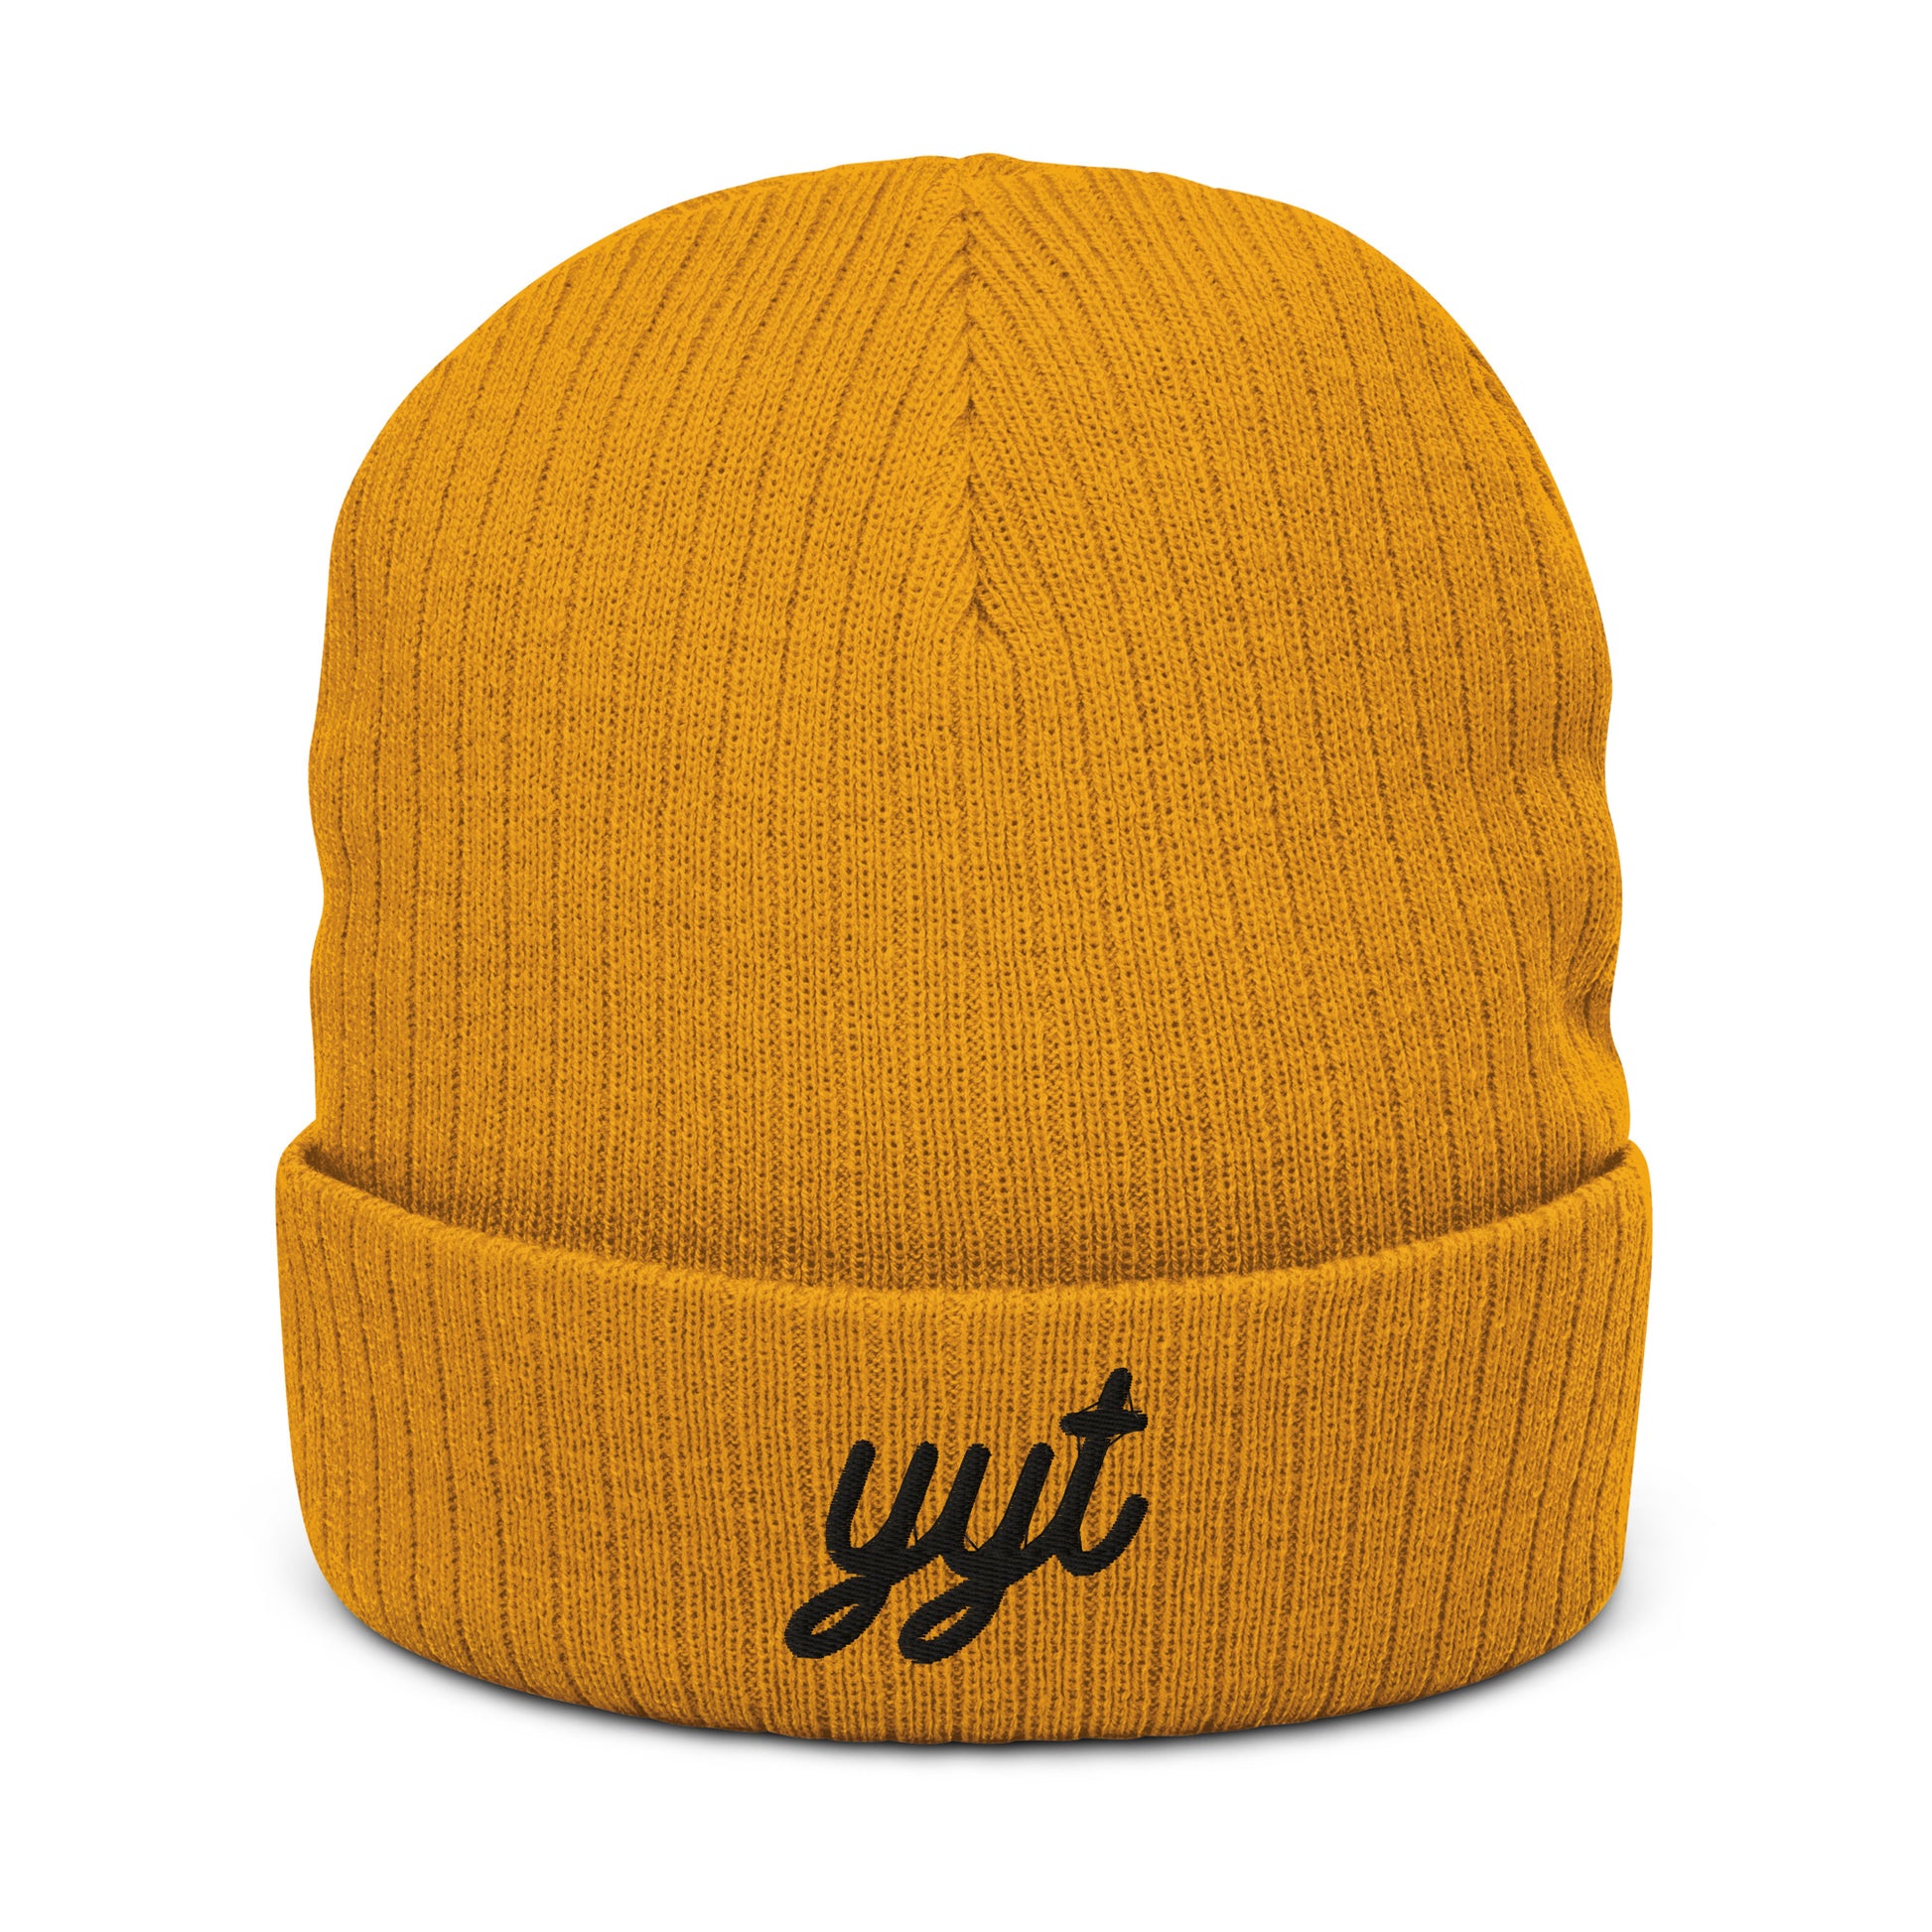 Vintage Script Recycled Cuffed Beanie • YYT St. John's • YHM Designs - Image 02